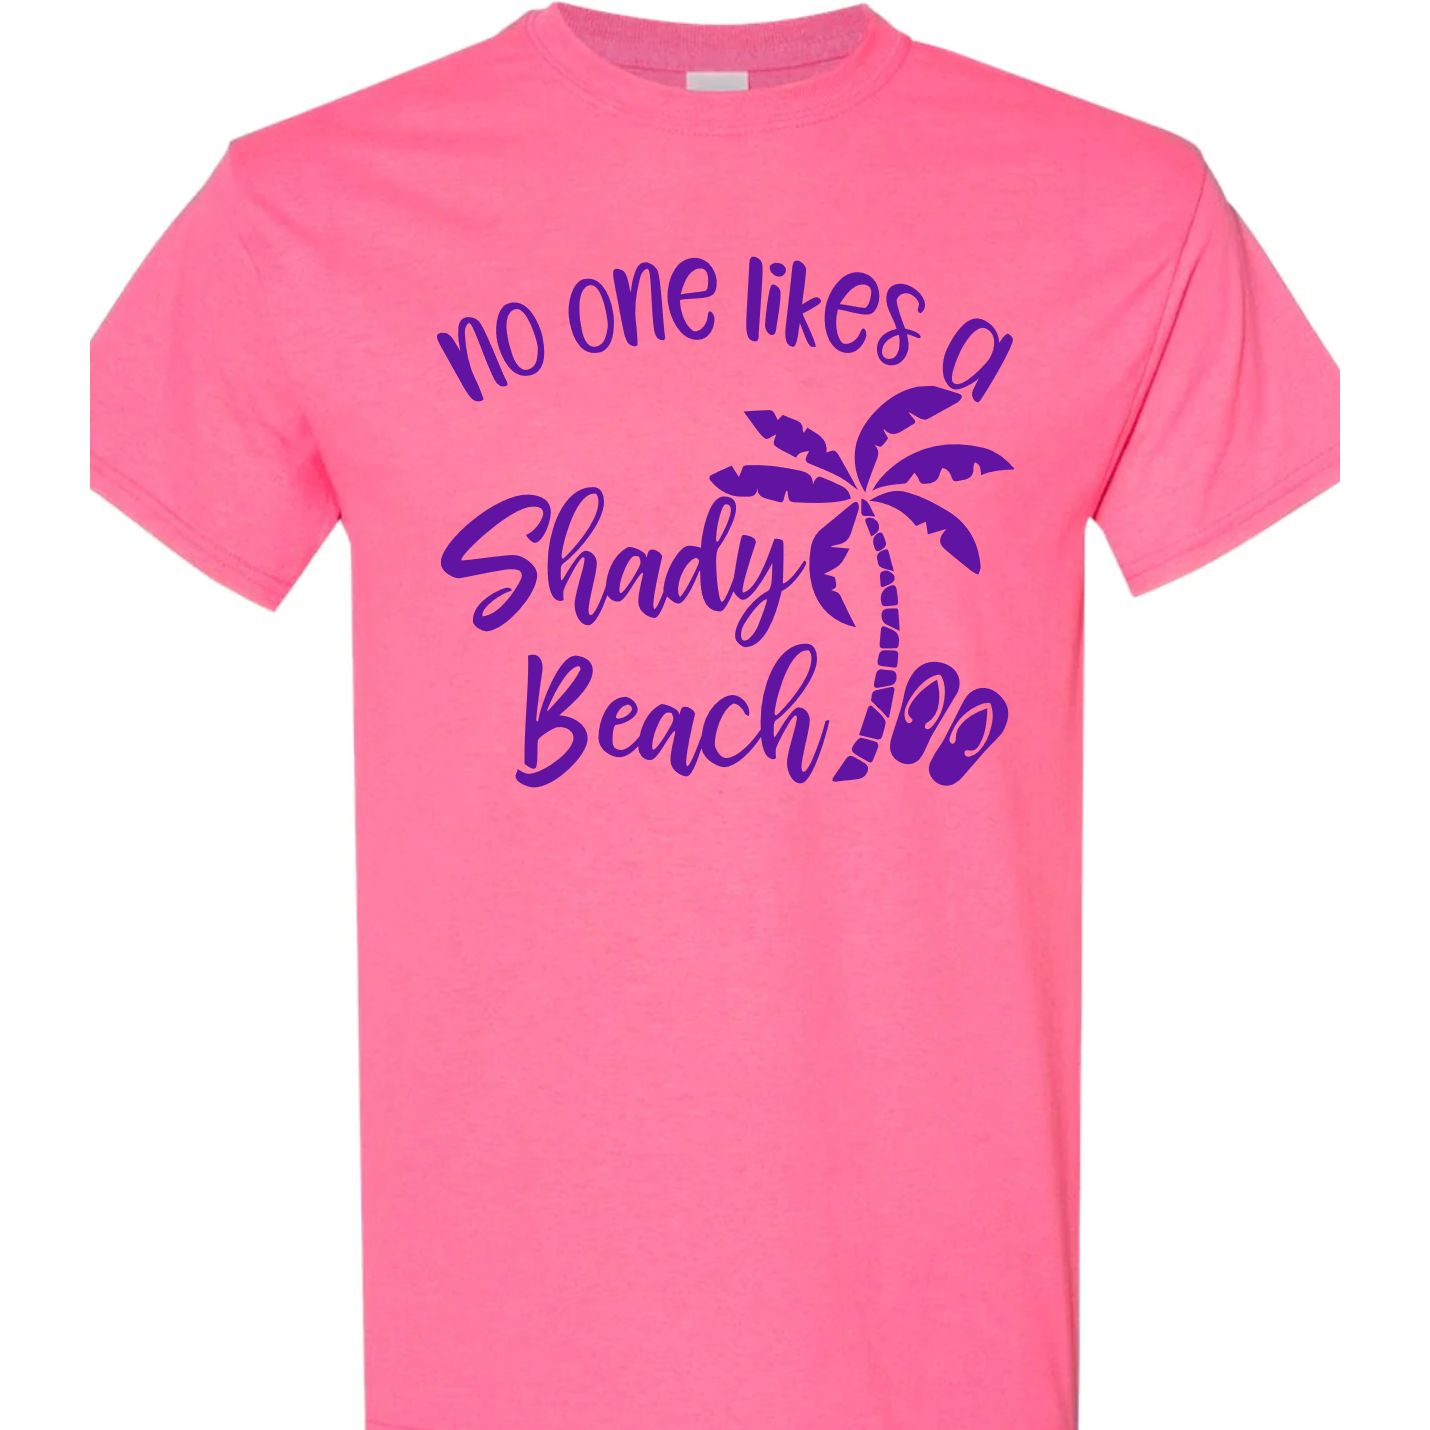 No One Likes a Shady Beach vinyl graphic for shirts